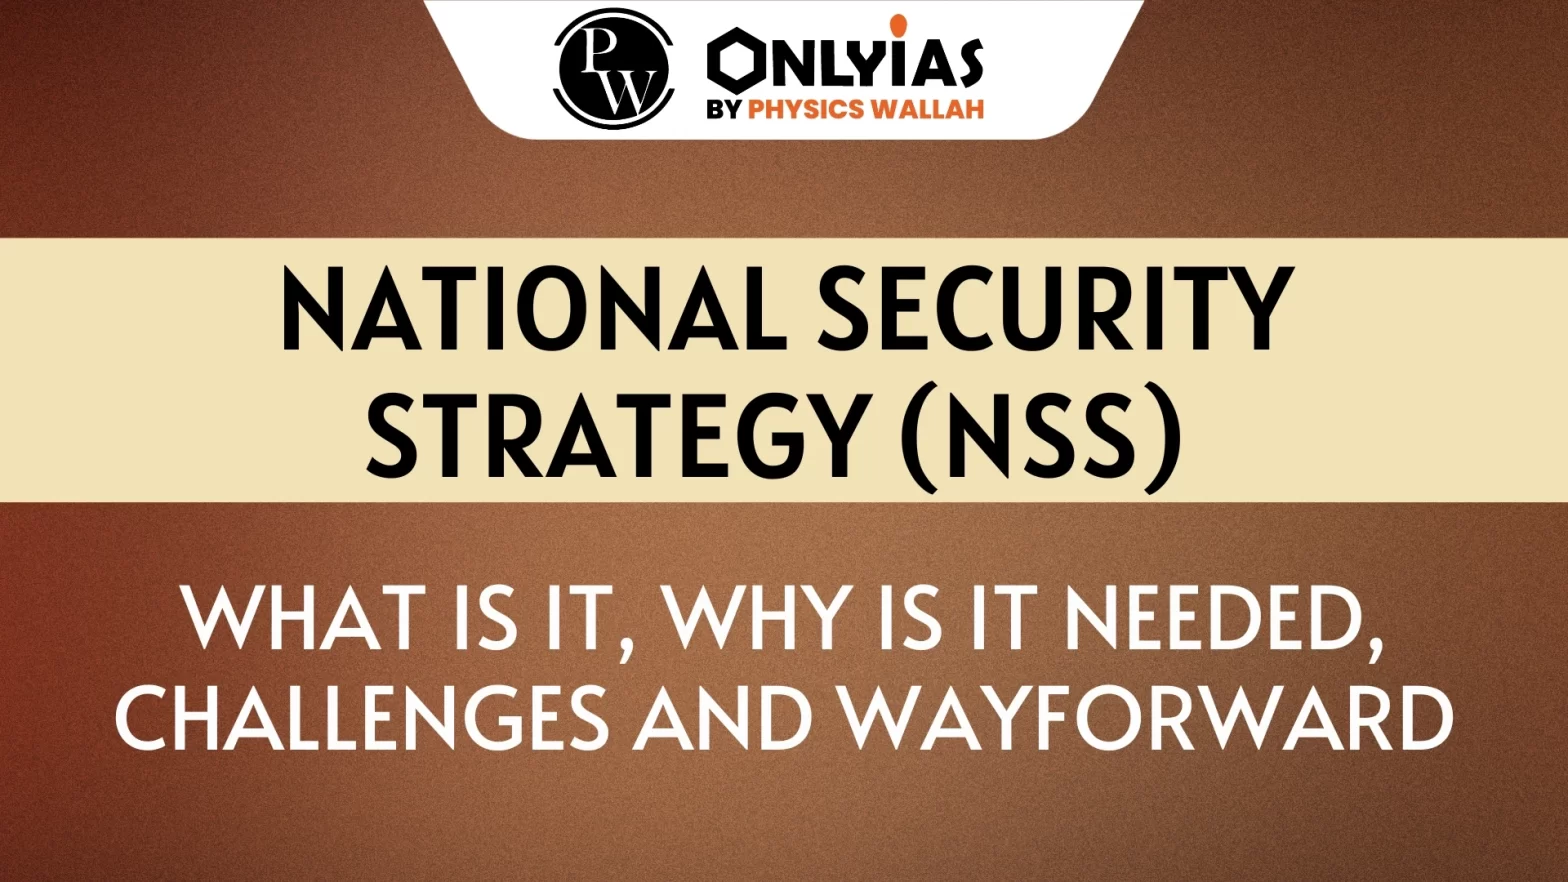 National Security Strategy (NSS): What Is It, Why Is It Needed, Challenges and Wayforward